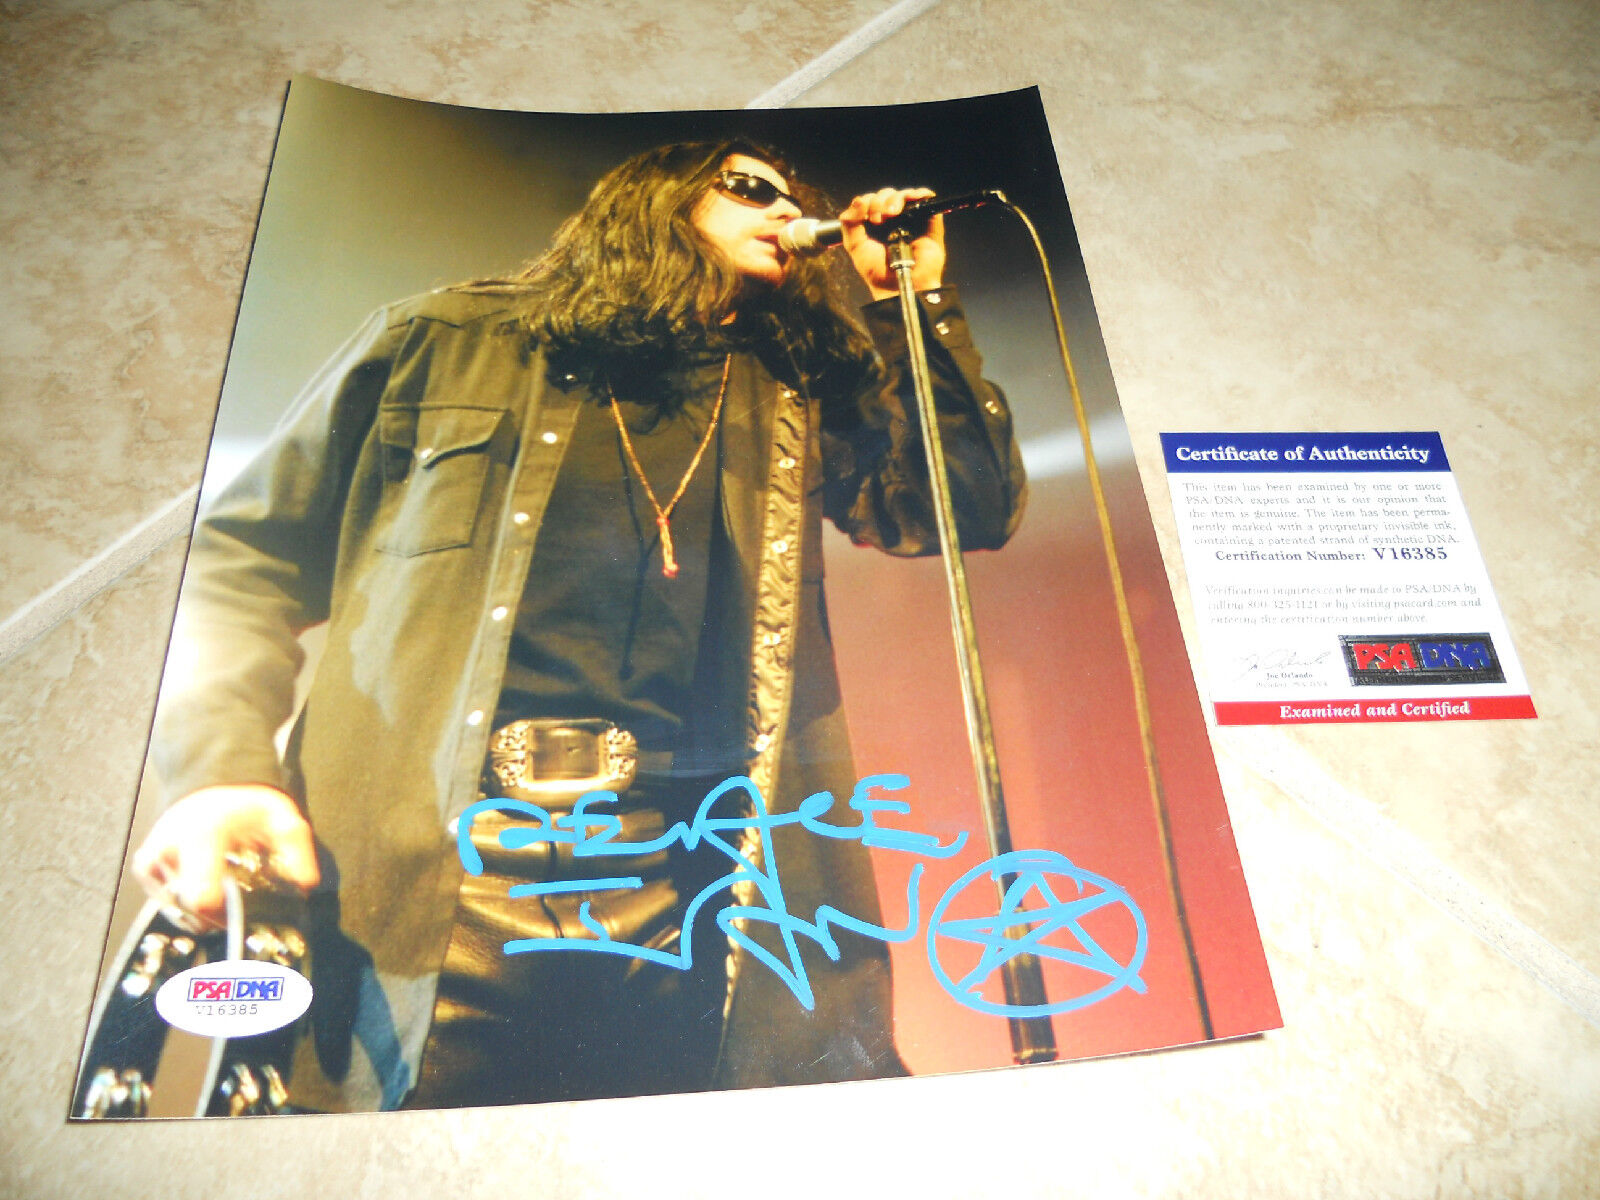 Ian Astbury The Cult Signed Autographed 8x10 Music Guitar Photo Poster painting #1 PSA Certified